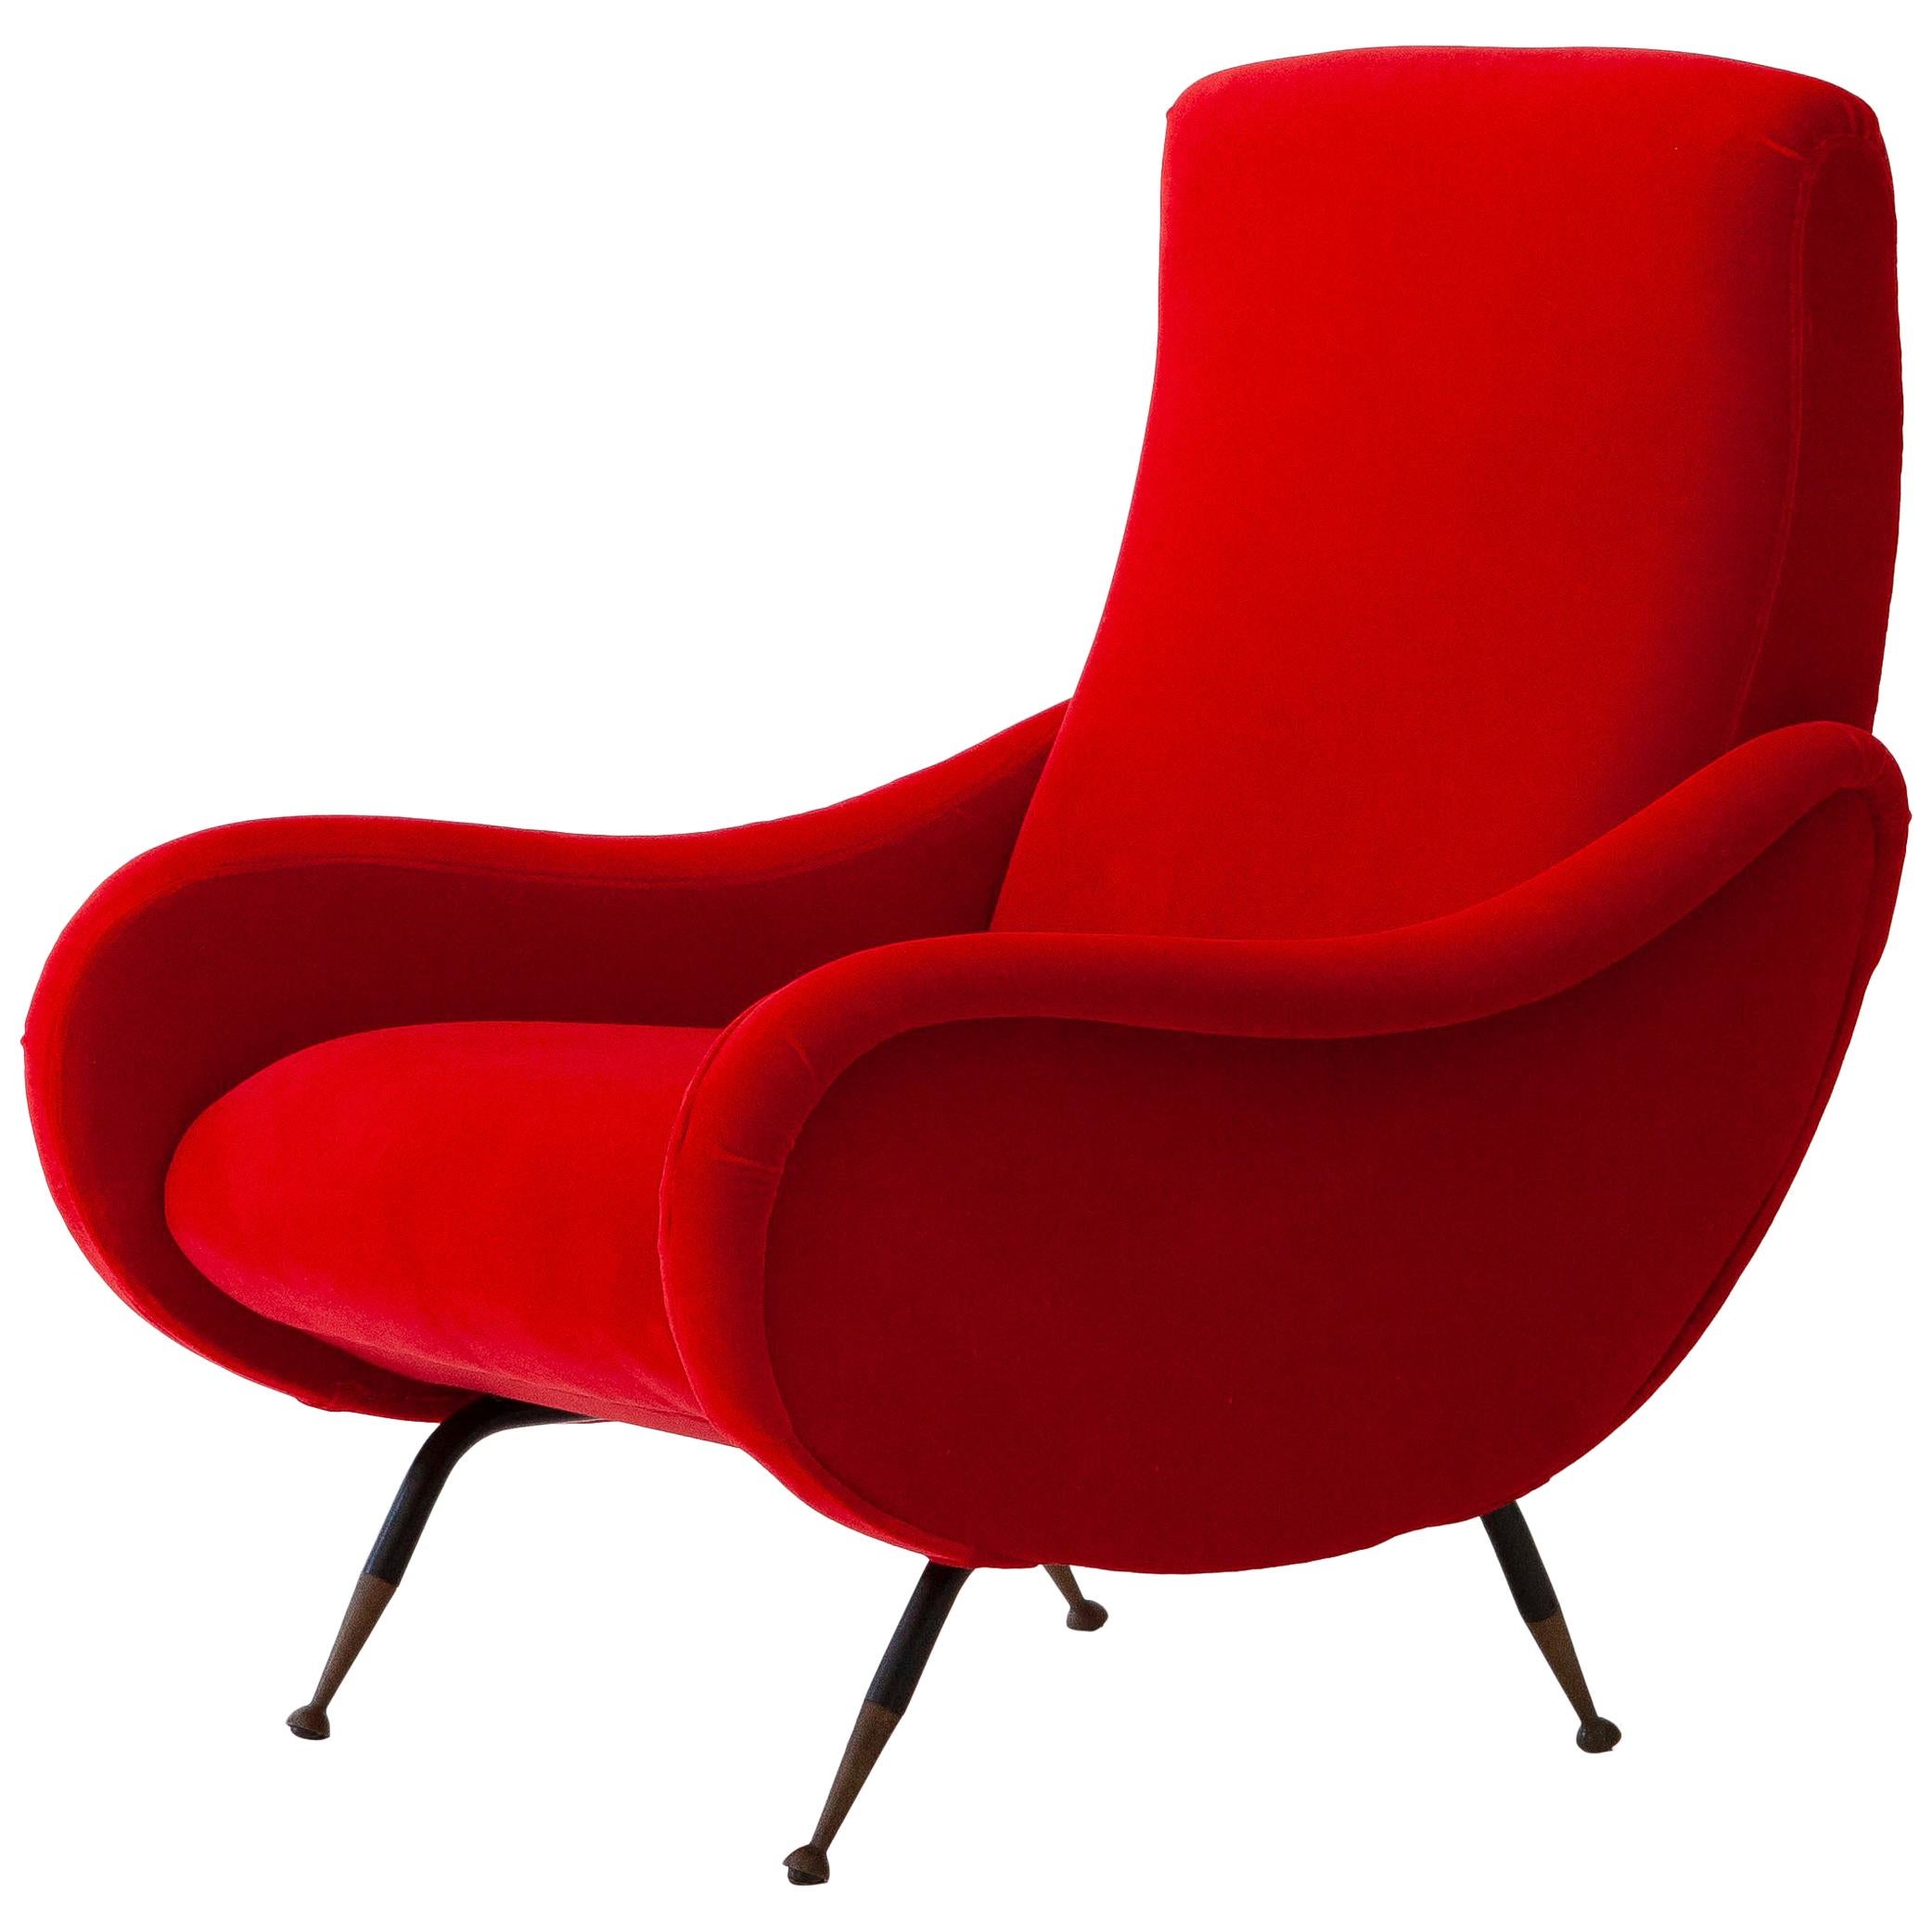 A Real Steal! Berry Red Velvet Designer Chair Lumbar Pillow by Dovecot –  DOVECOTE